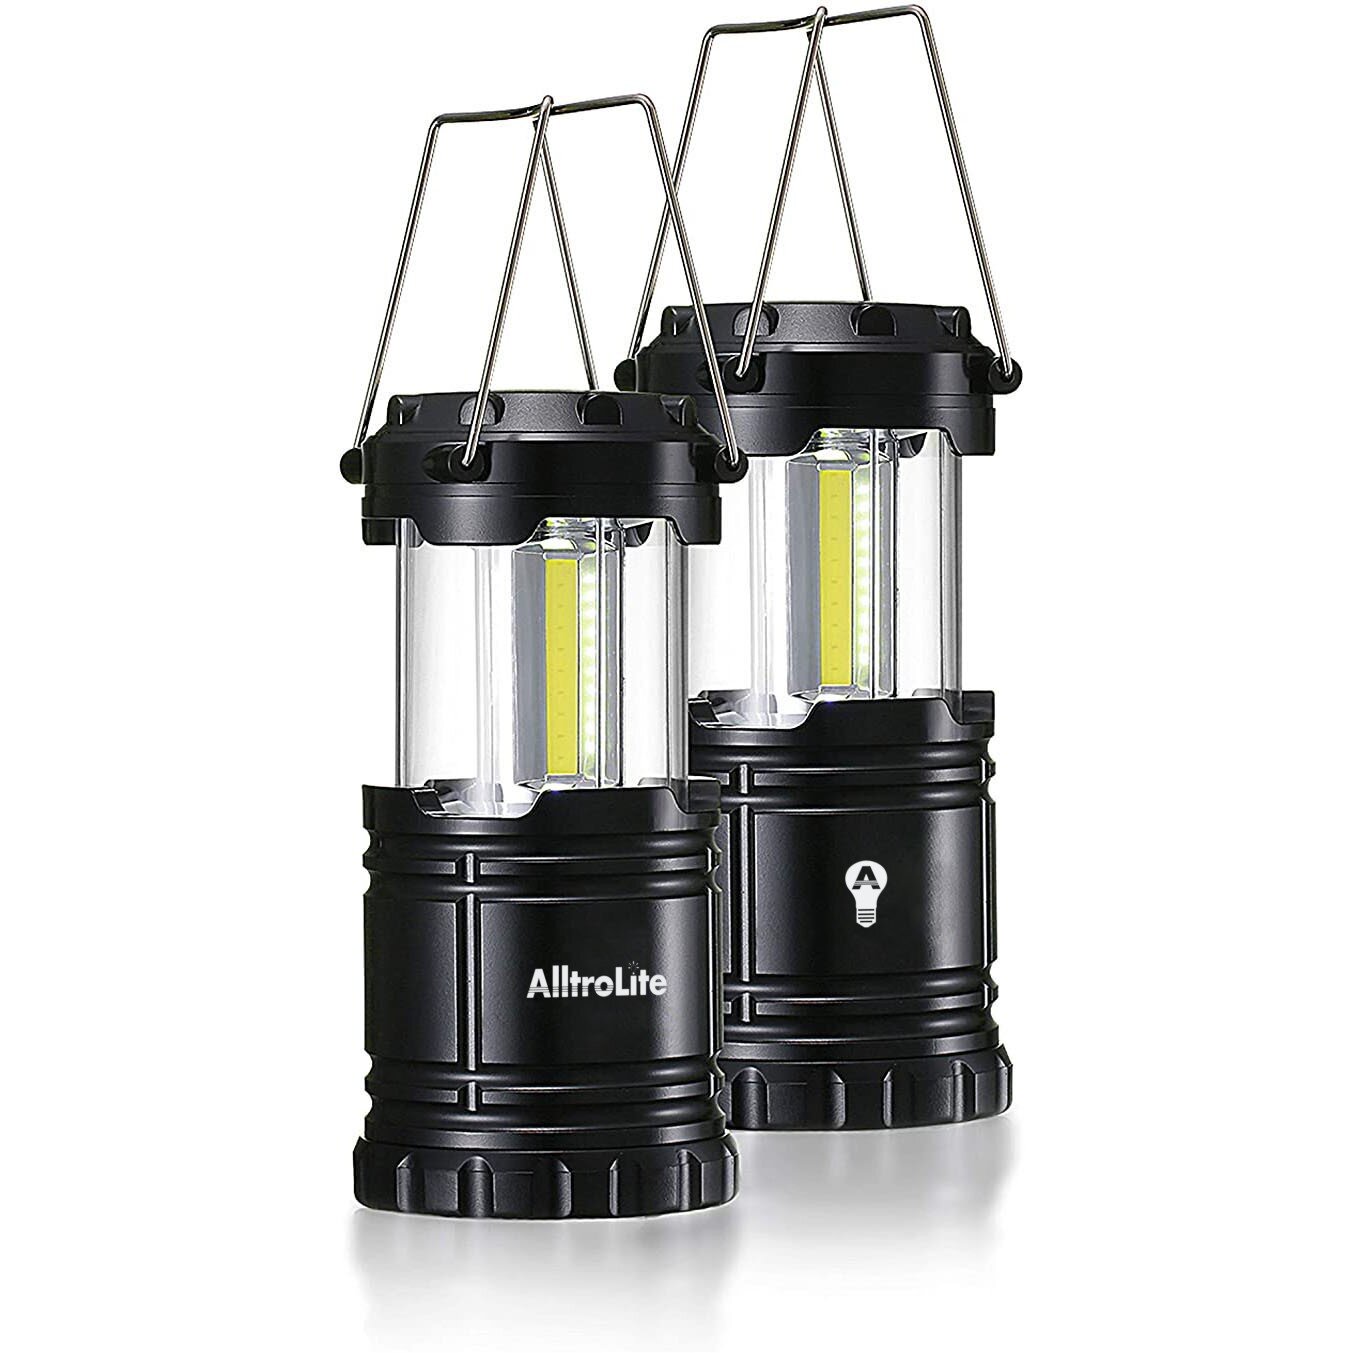 Details about   AA Battery LED Portable Light Lantern Outdoor Camping Hiking Lamp 